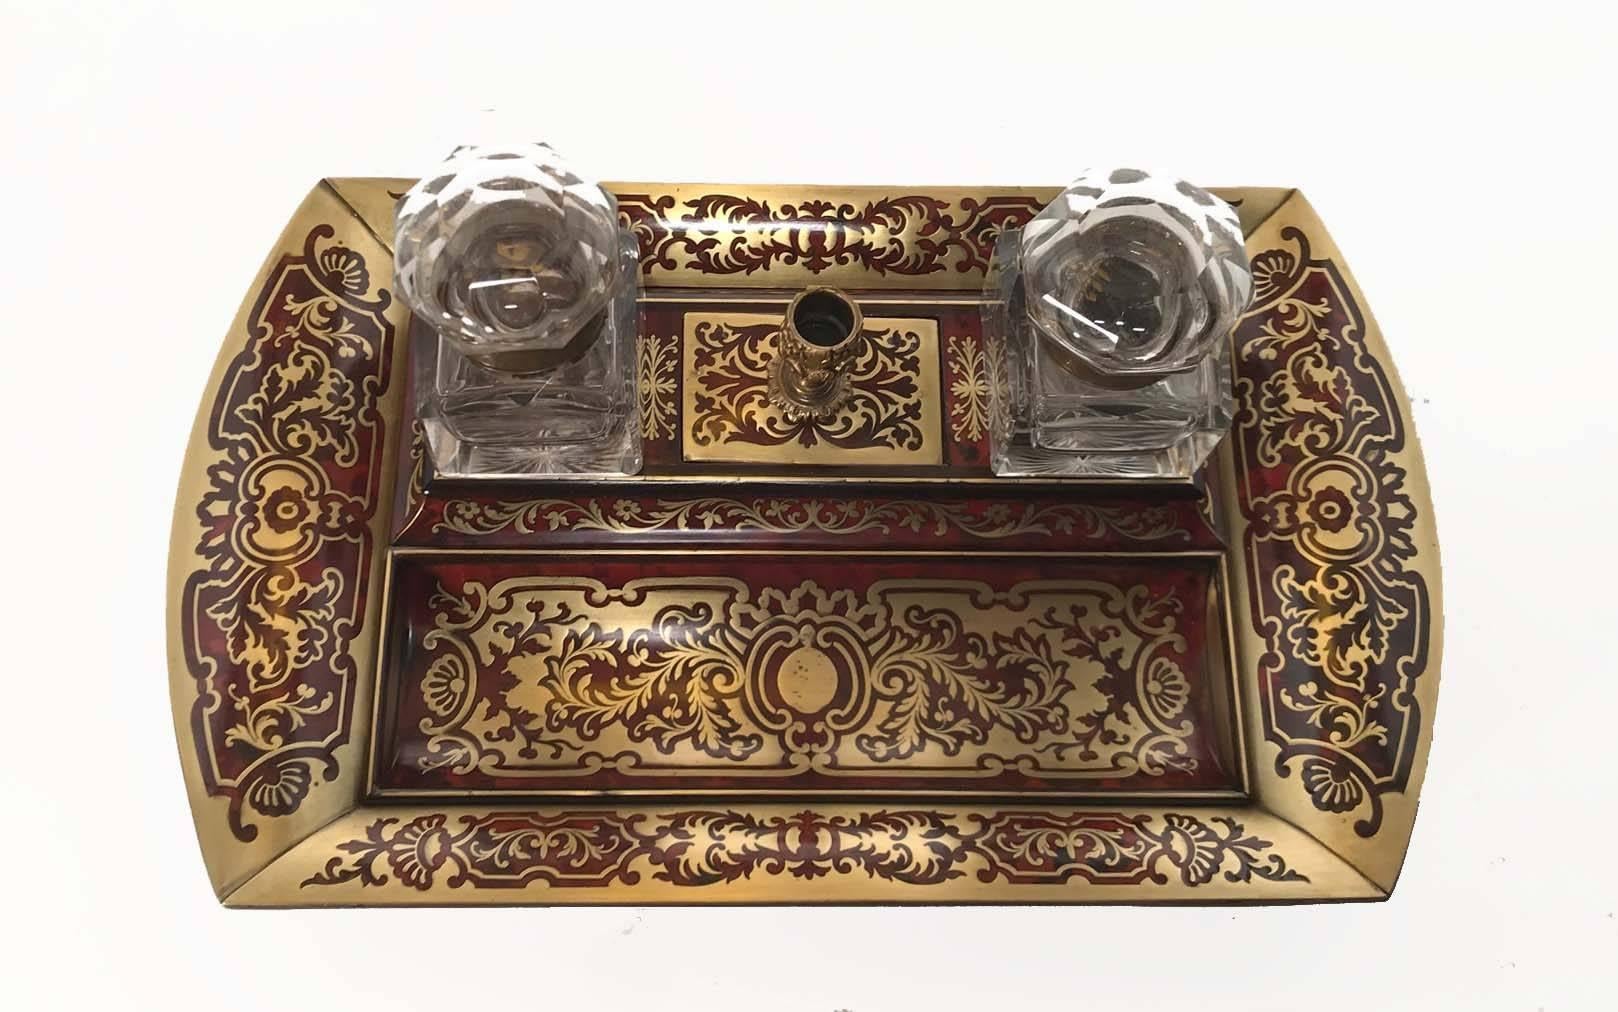 This inkstand exemplifies the excellence of French decorative accessories of the period. The design is well-thought out with everted edges, a trough-shaped depression for pens and even a candlestick for melting the sealing-wax wafers or sticks that